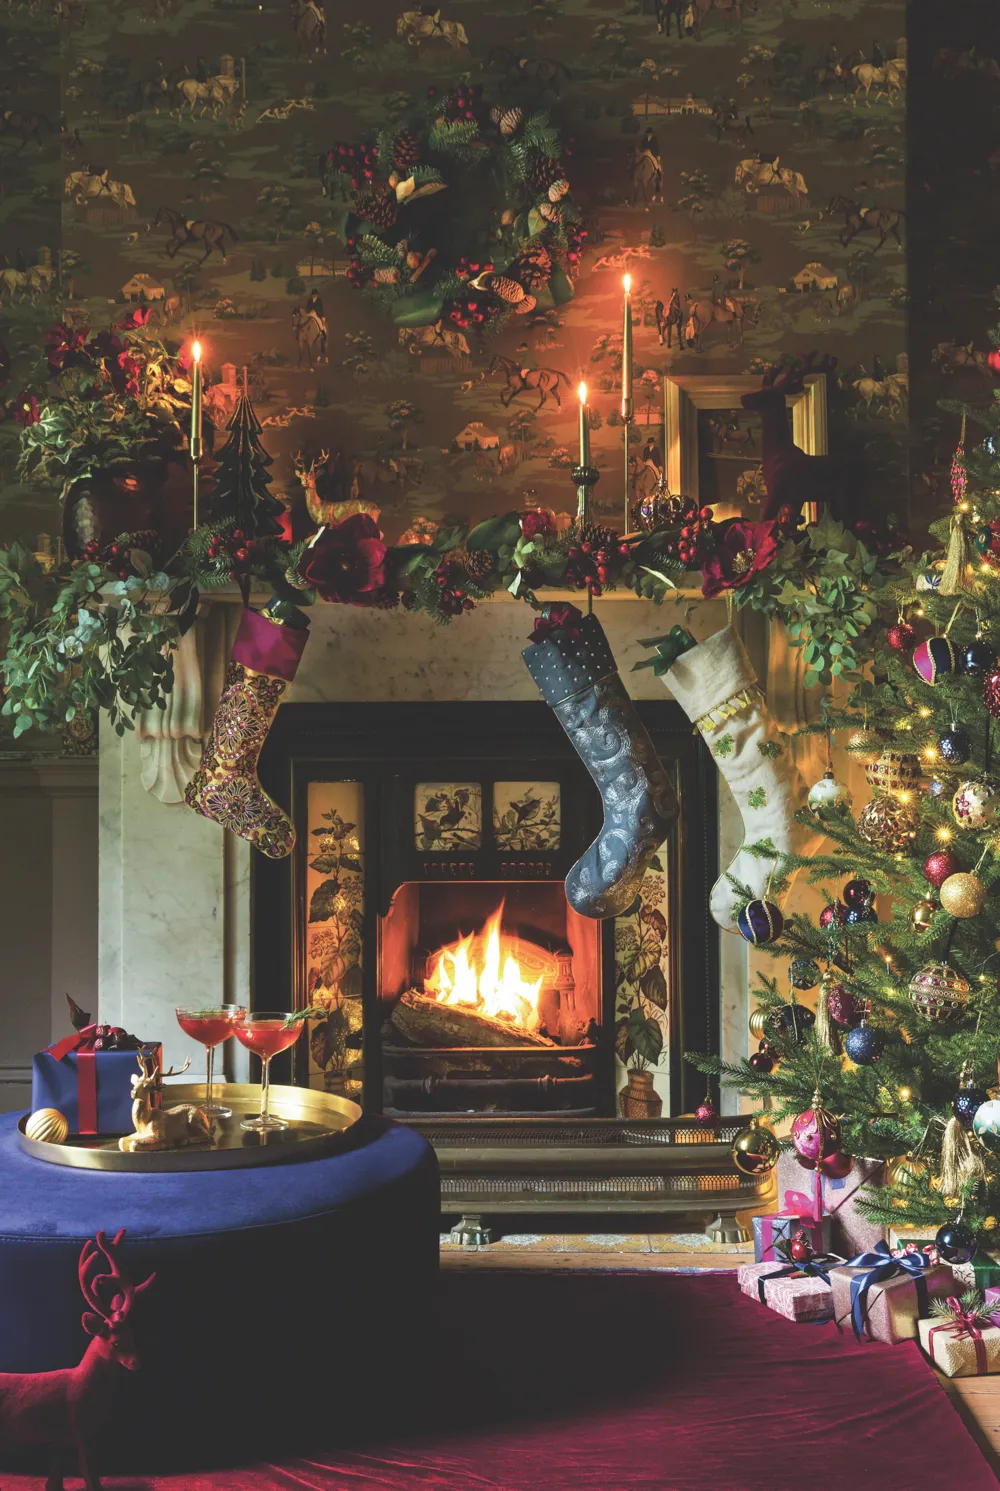 Channel the drama and decadence of a Victorian Christmas celebration when recreating this look from Amara. Baubles and stockings in jewel tones as well as rich velvets create an opulent feel.